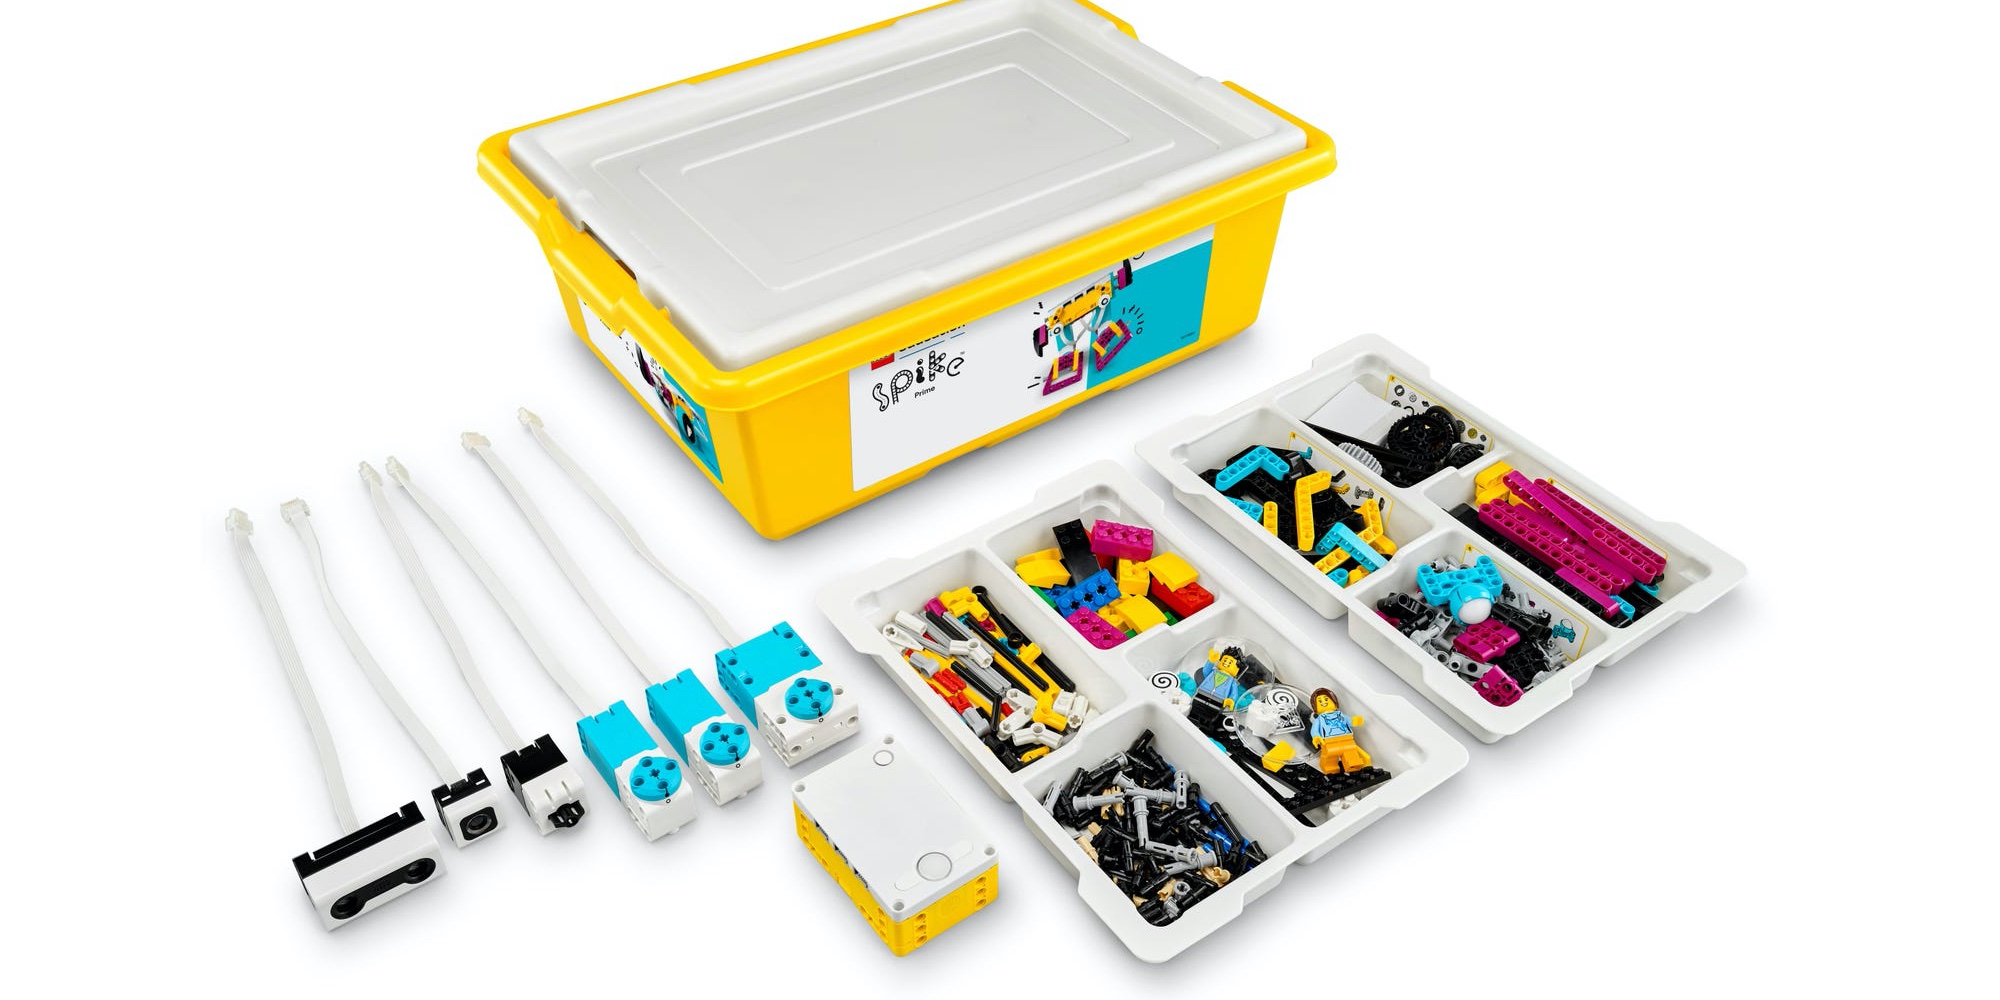 LEGO coding kits are now publicly available for first time - 9to5Toys